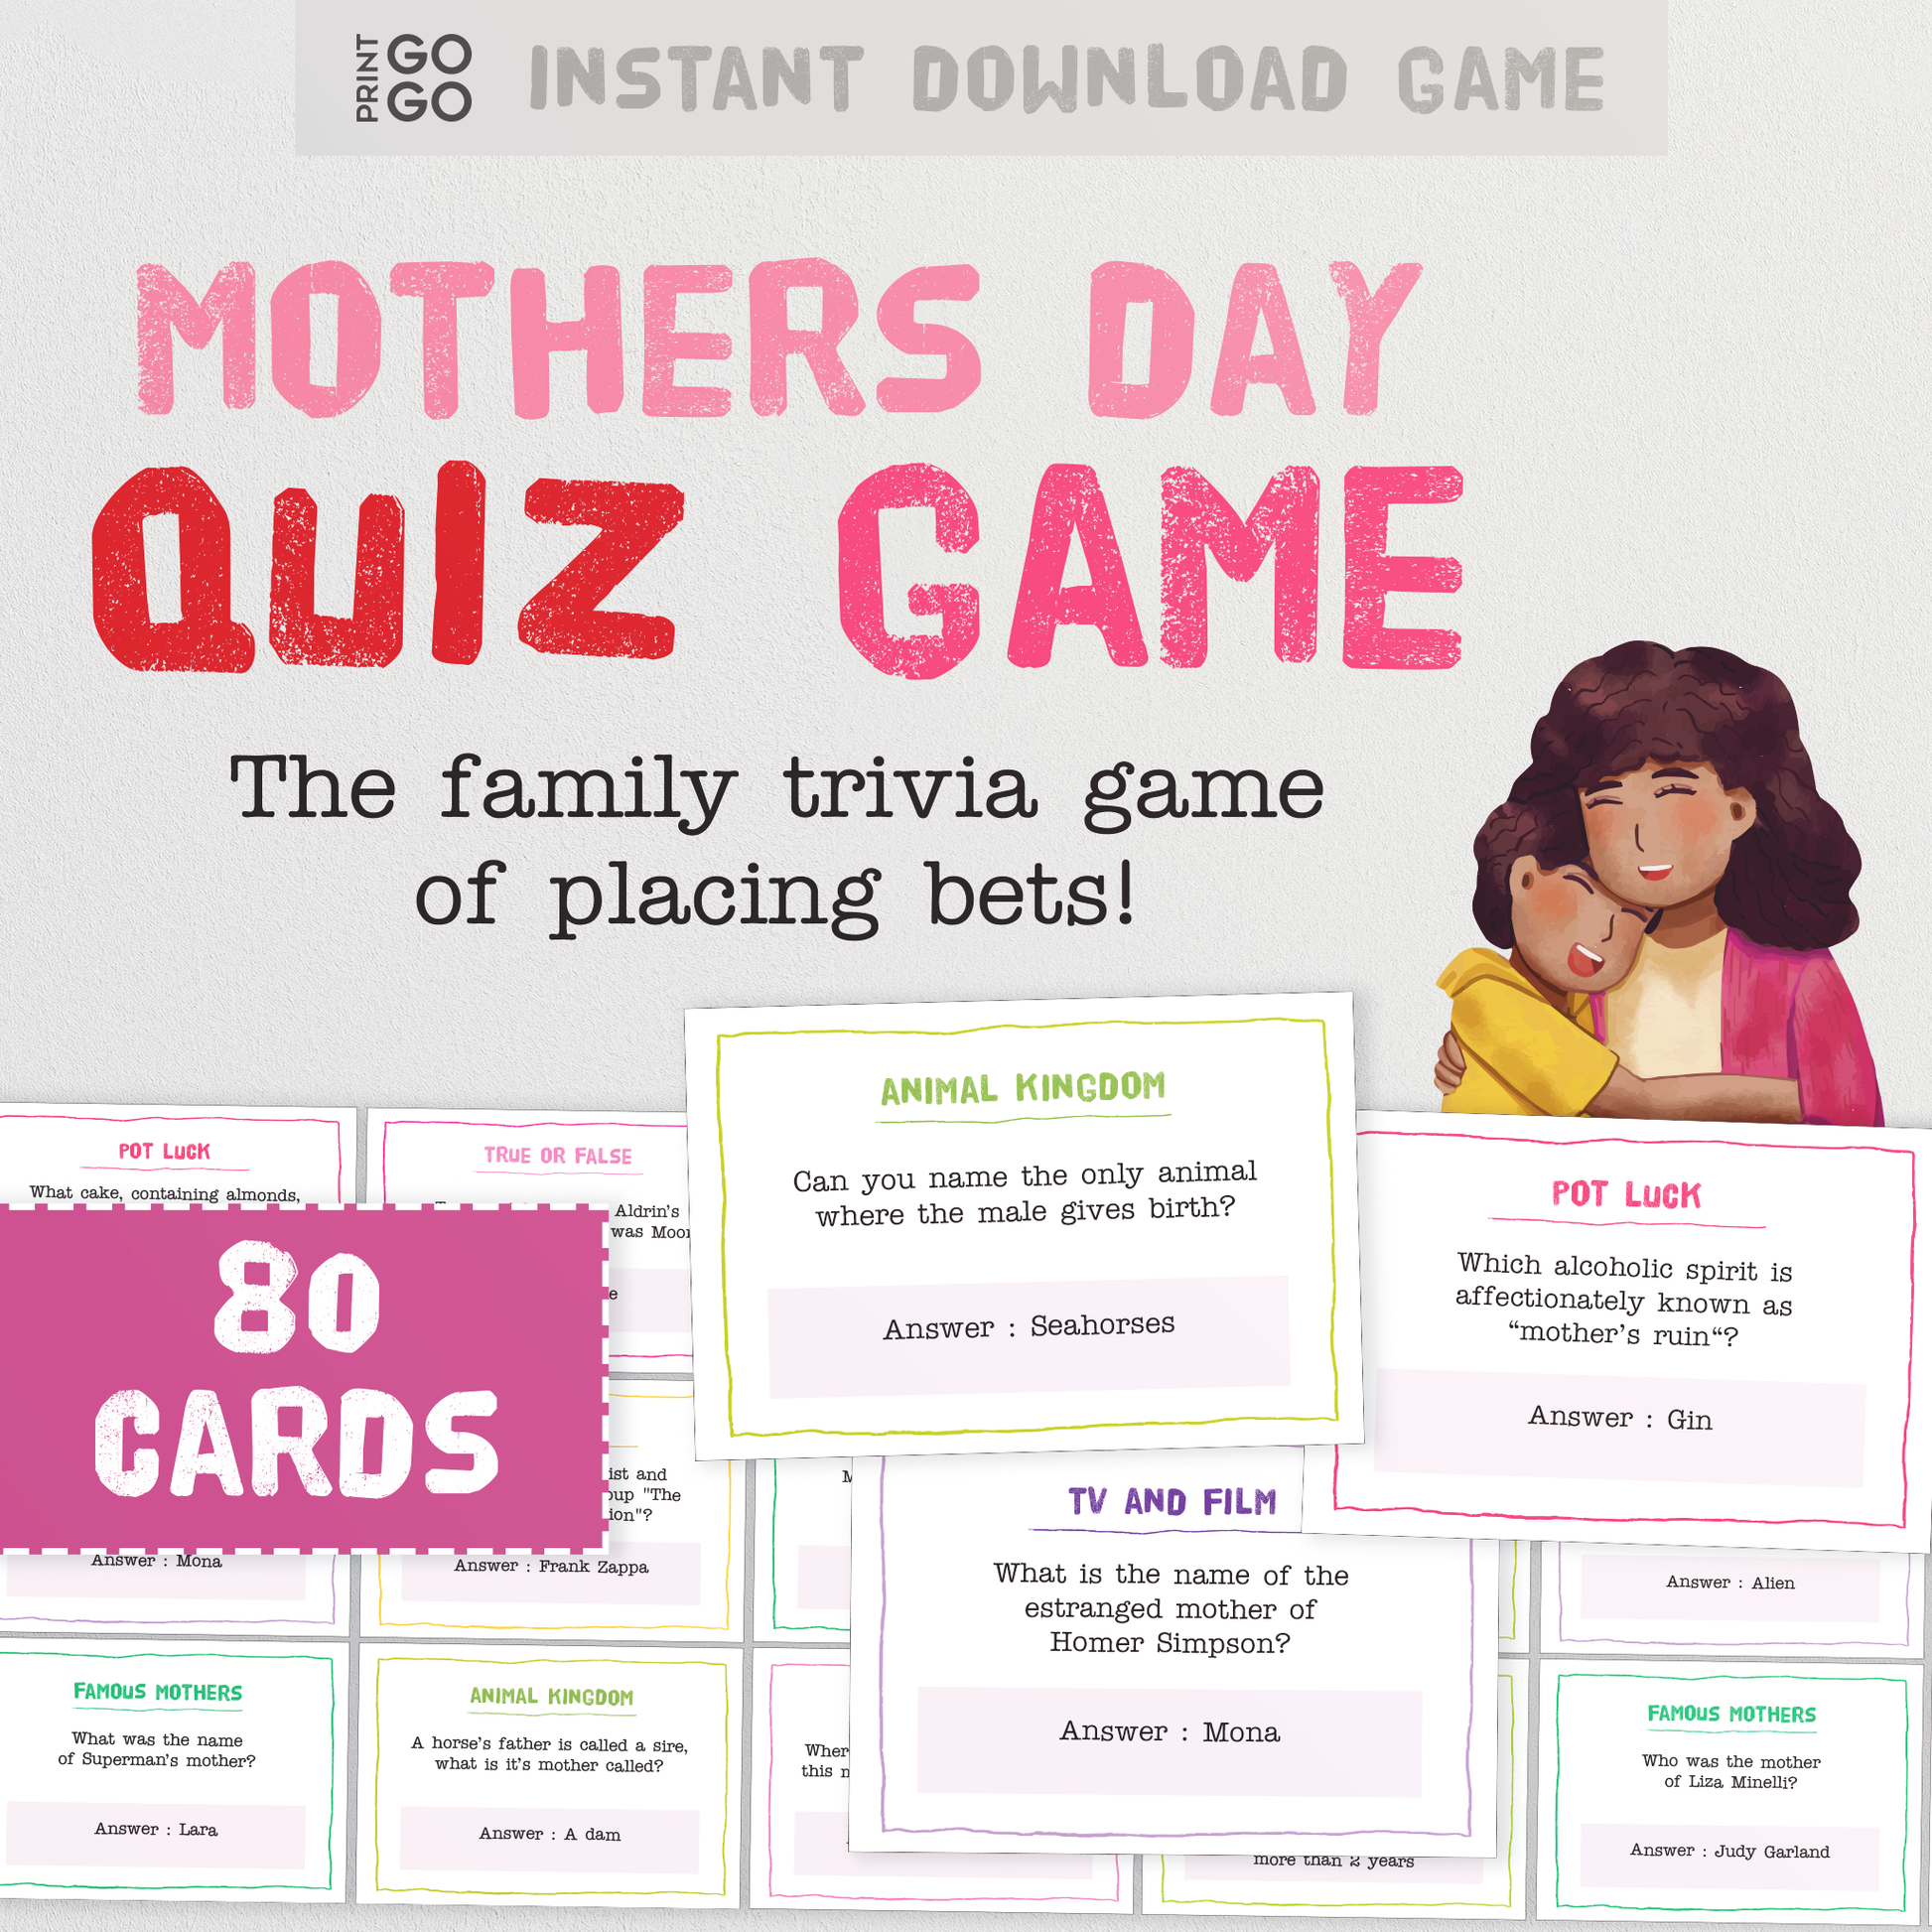 Mother's Day Quiz Game - The Fun Trivia Group Party Game of Placing Bets!